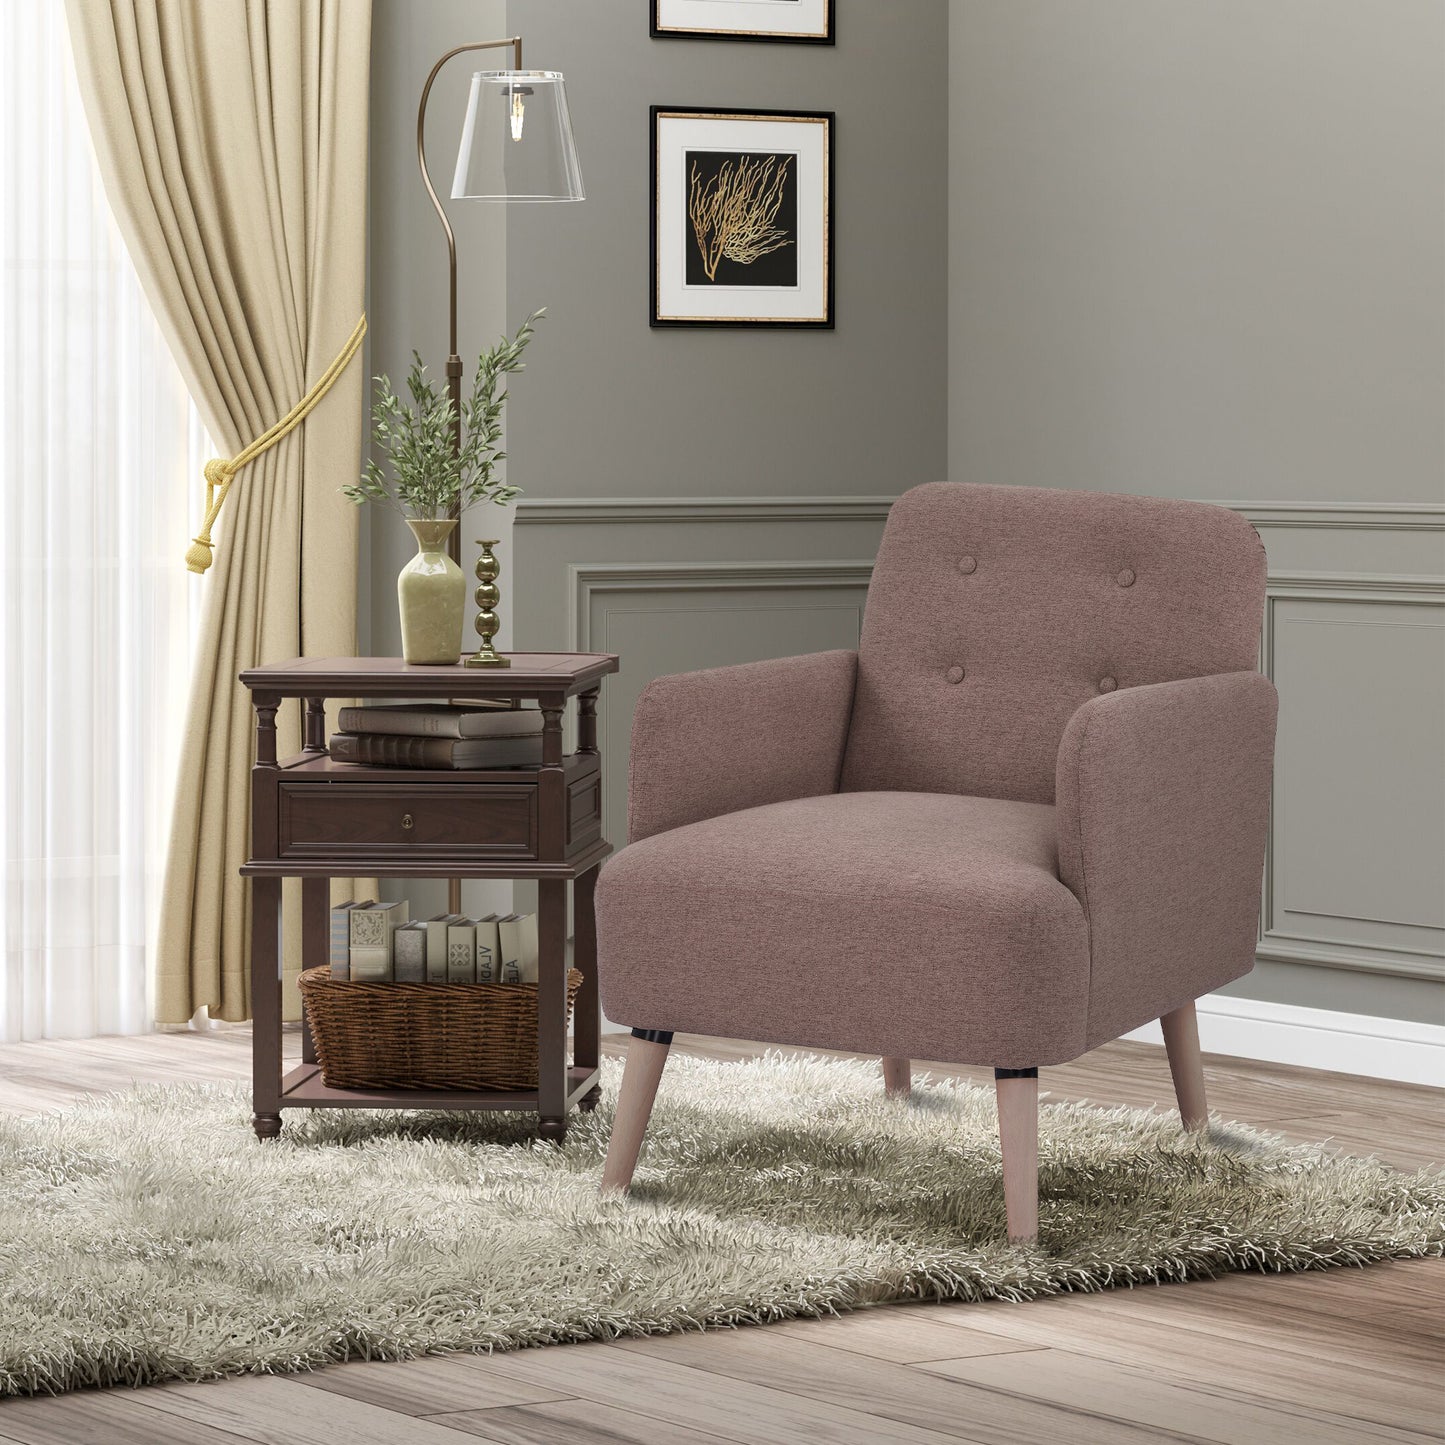 HOMCOM Upholstered Armchair, Nature Wood Frame Living Room Chairs with Birch Wood Legs & Thick Padding Seat and Button Mid-Back, Light Brown